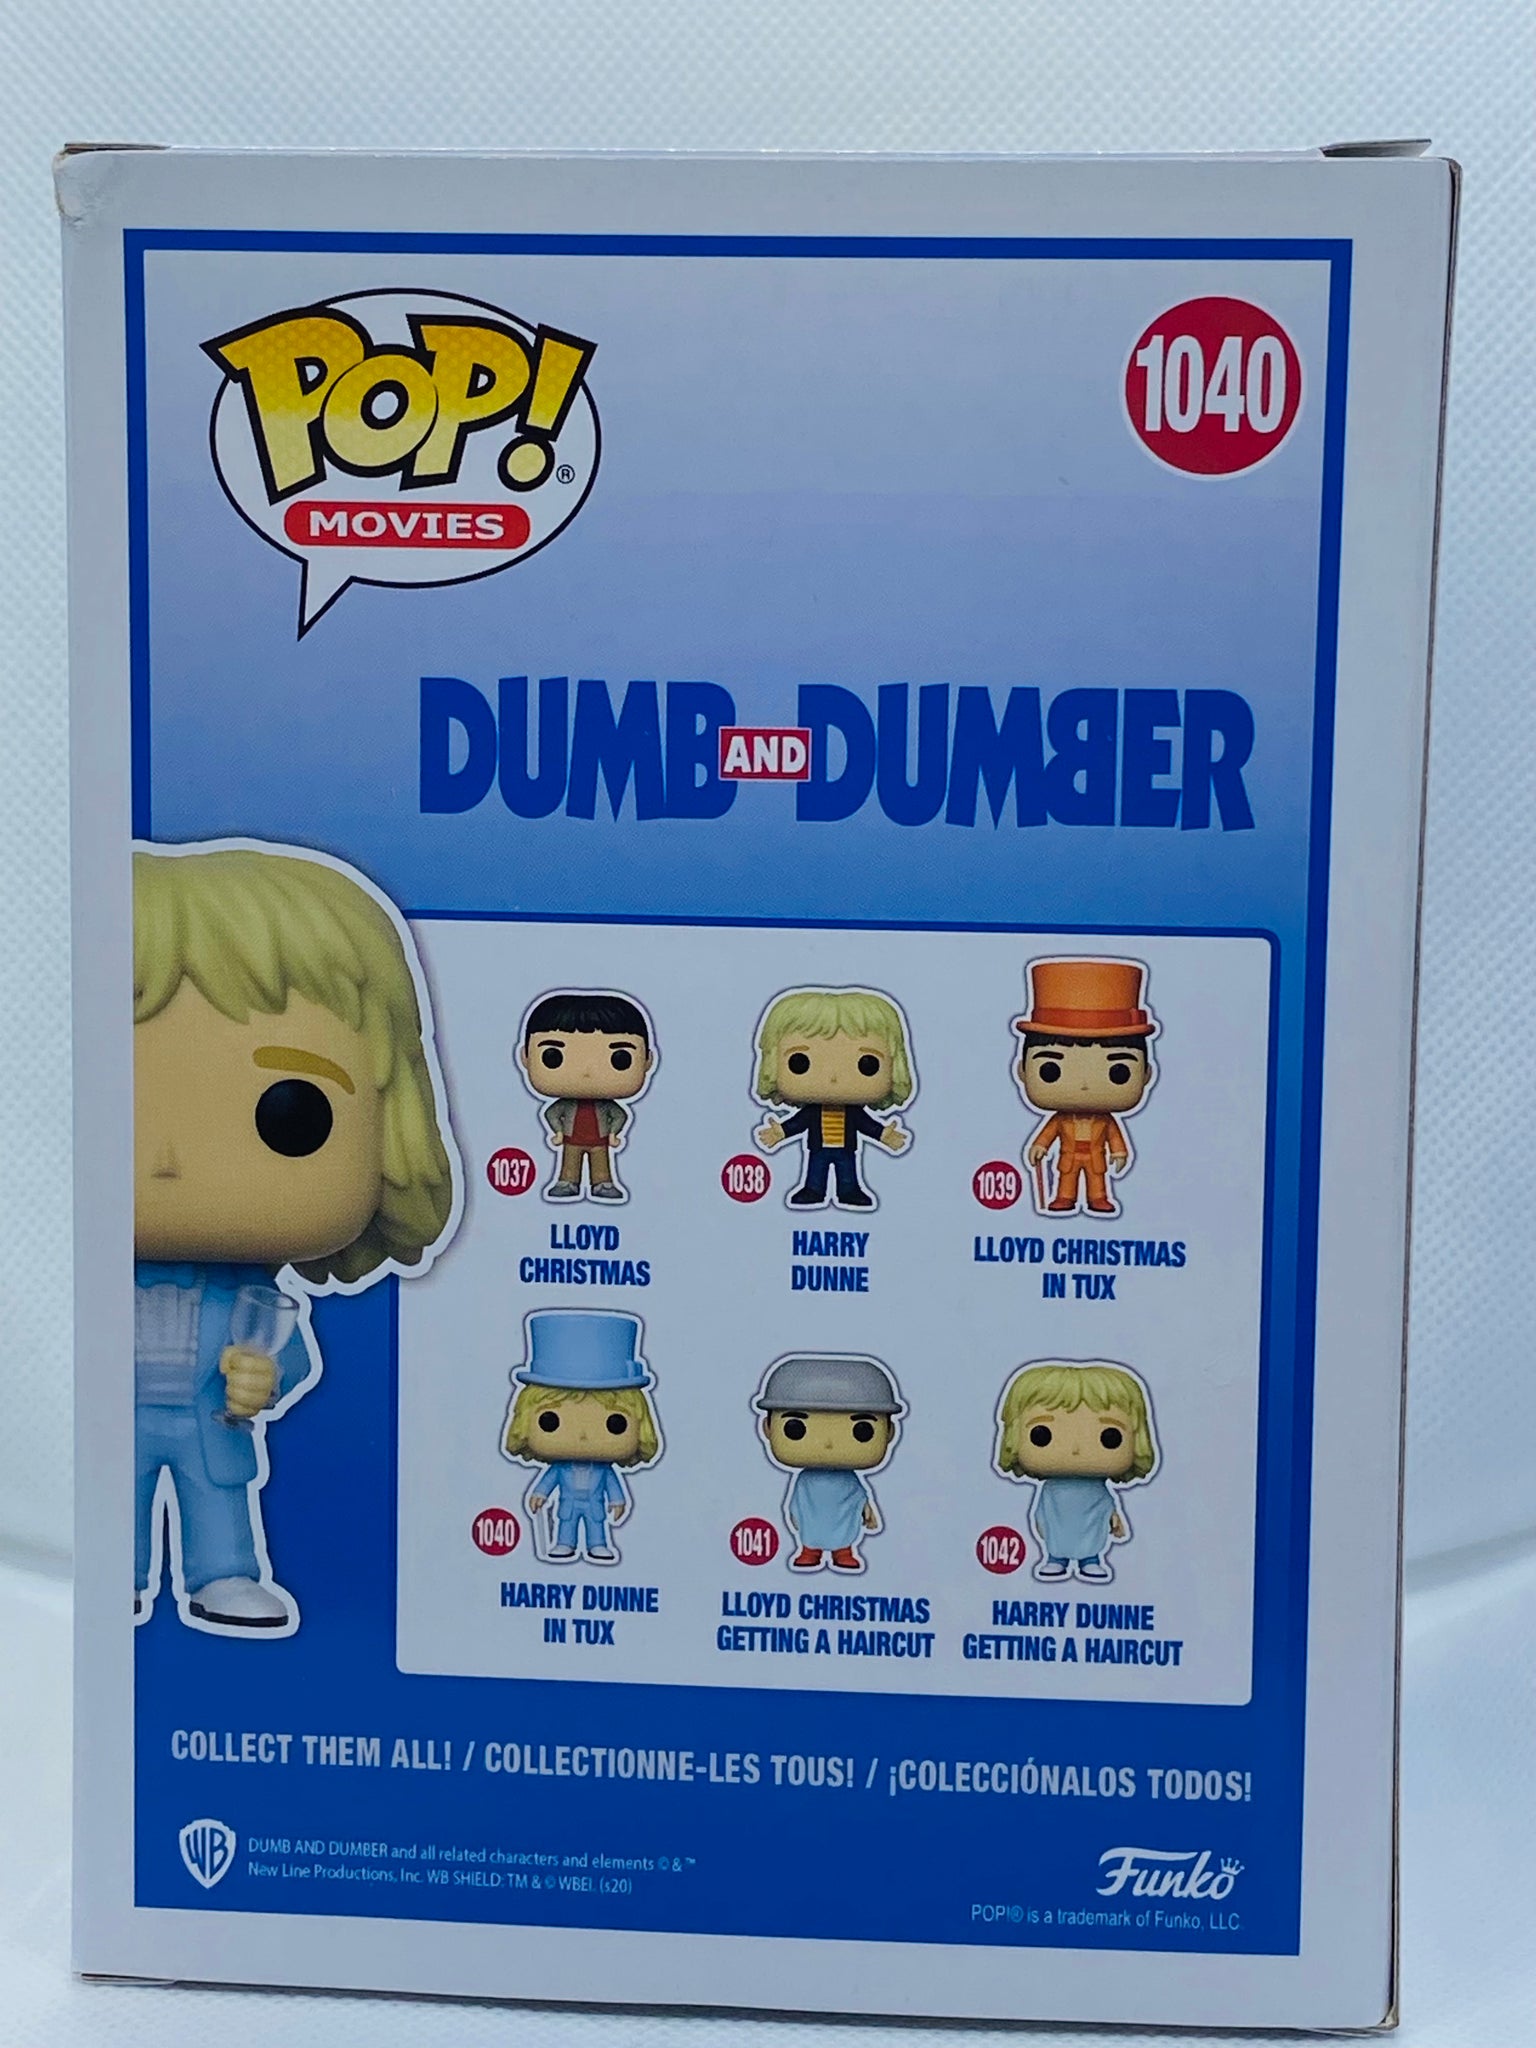 Harry Dunne in Tux 1040 Dumb and Dumber Limited Edition Chase